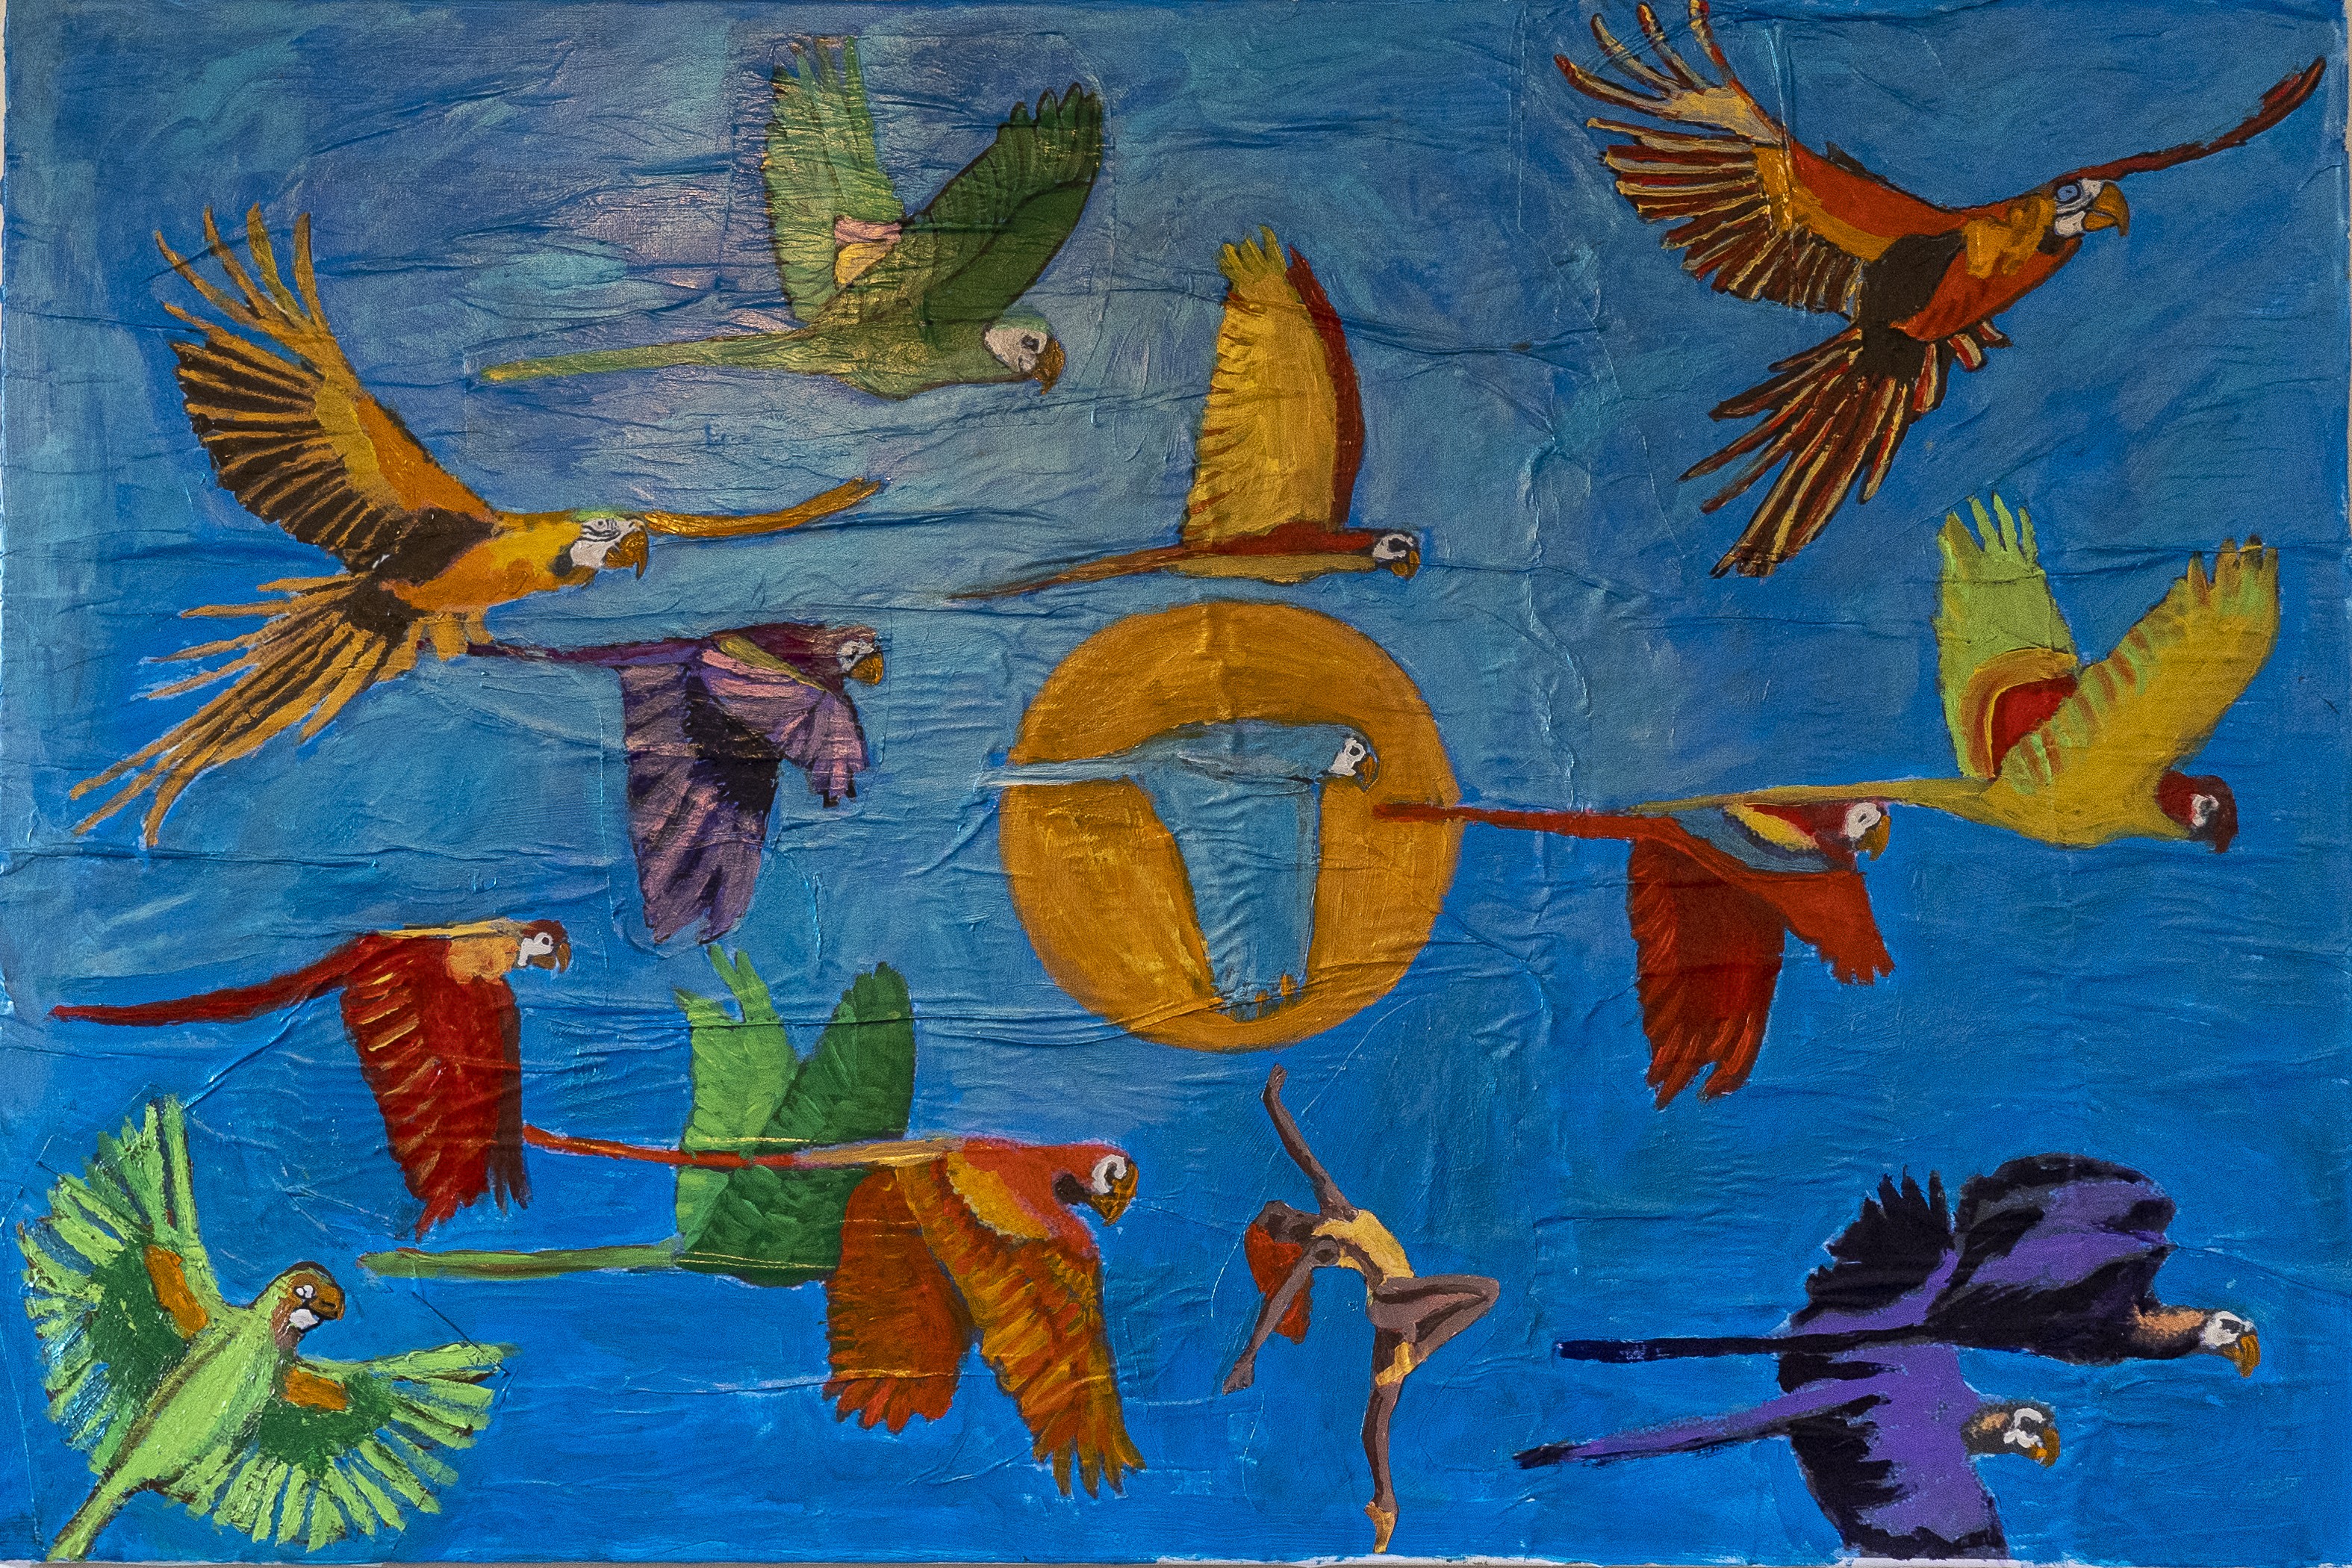 Parrots in the blue